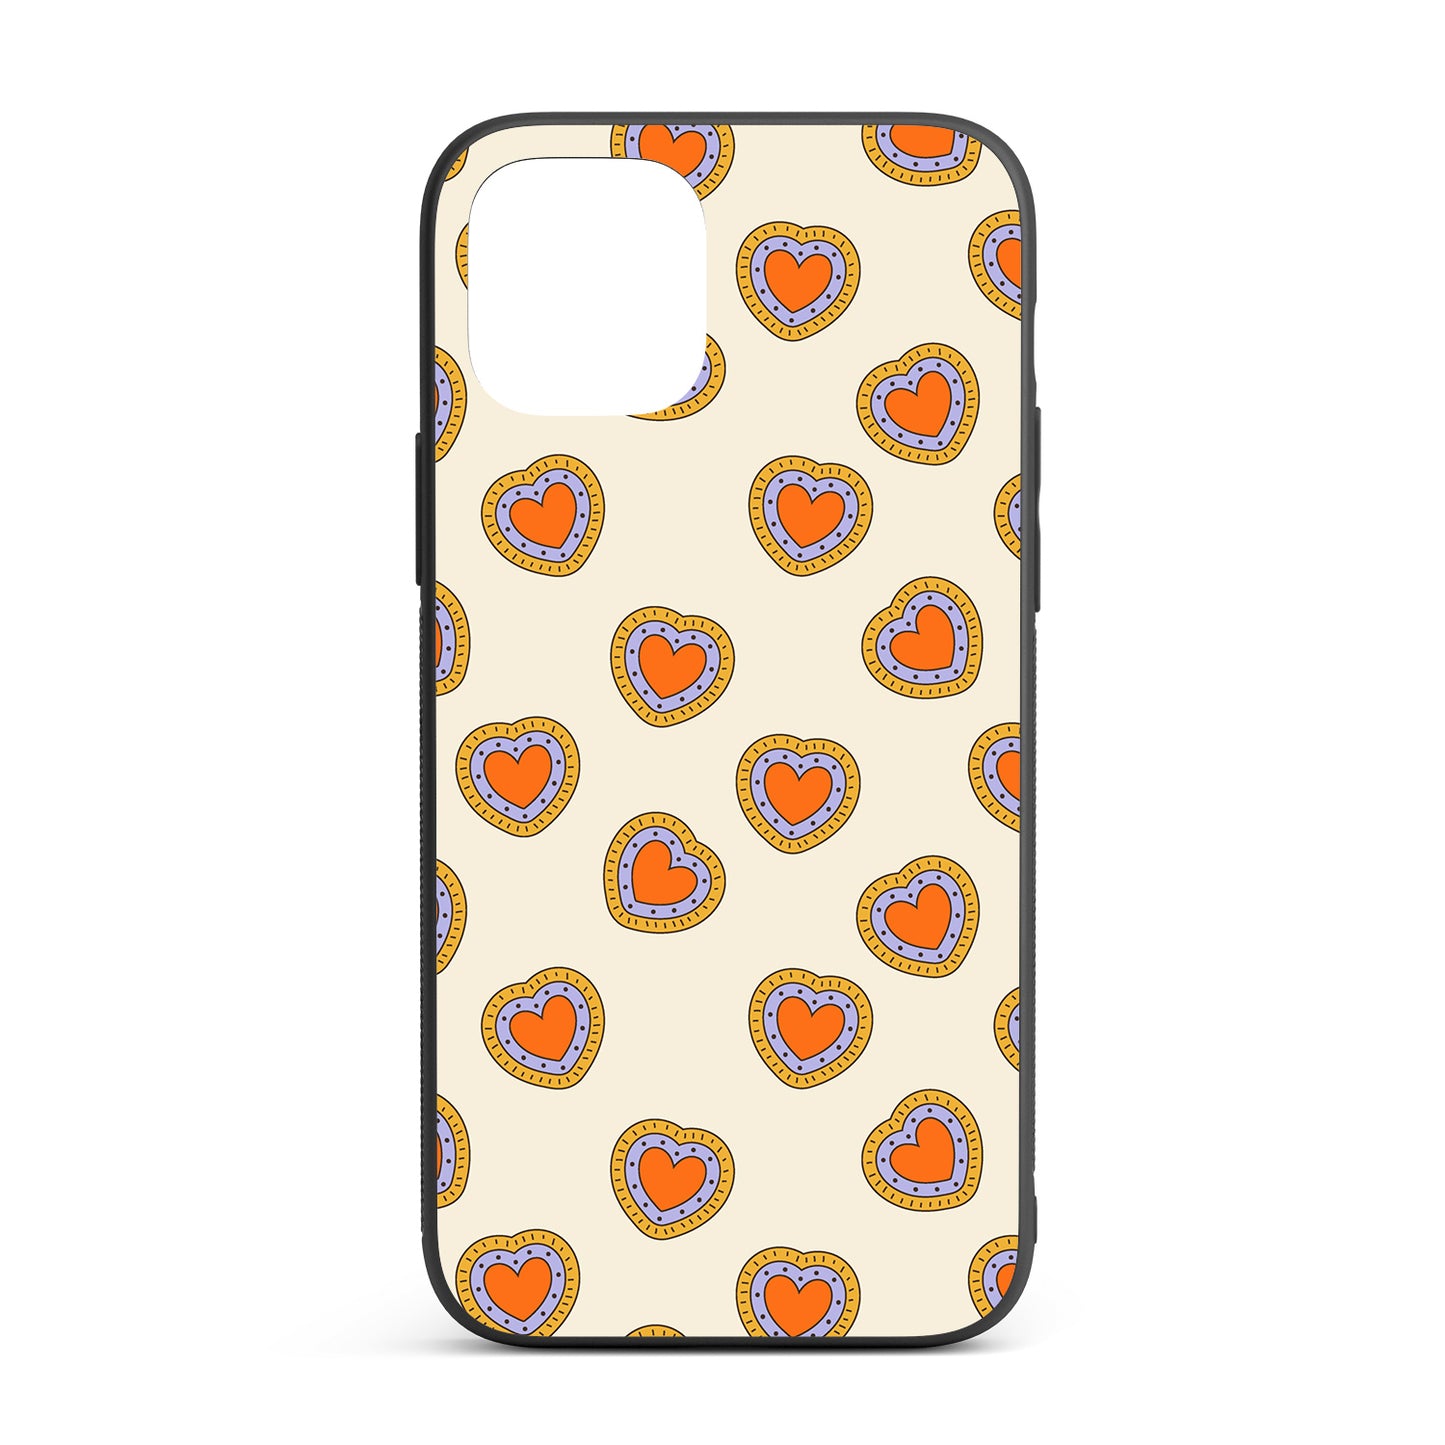 Groovy Heart Me iPhone glass case